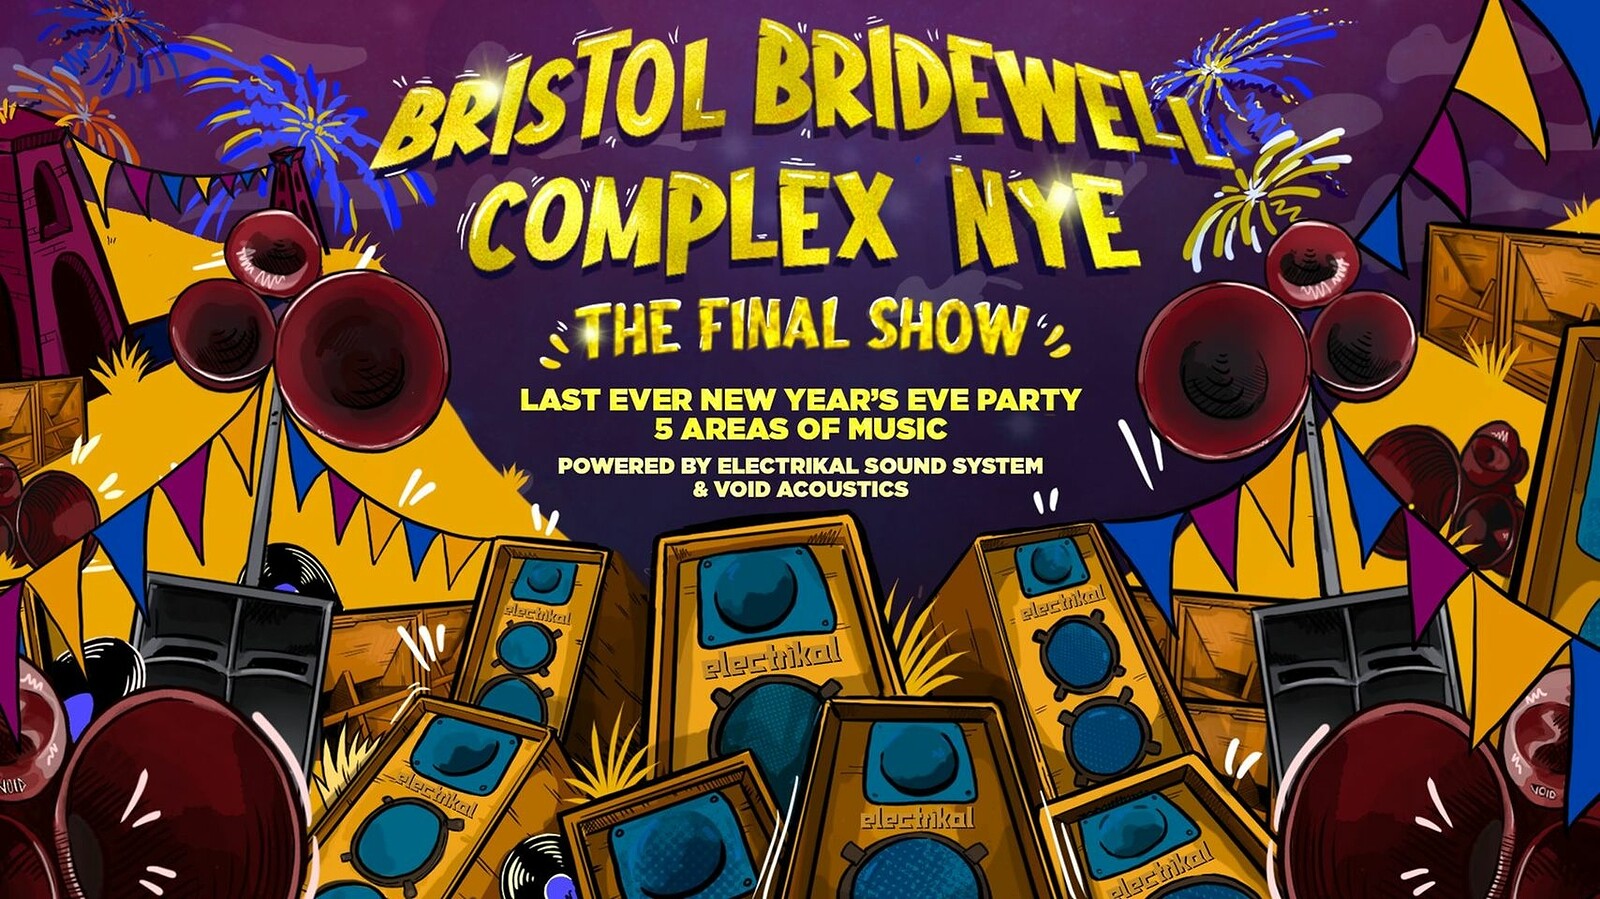 Bristol Bridewell Complex NYE • The Final Show at The Old Crown Courts